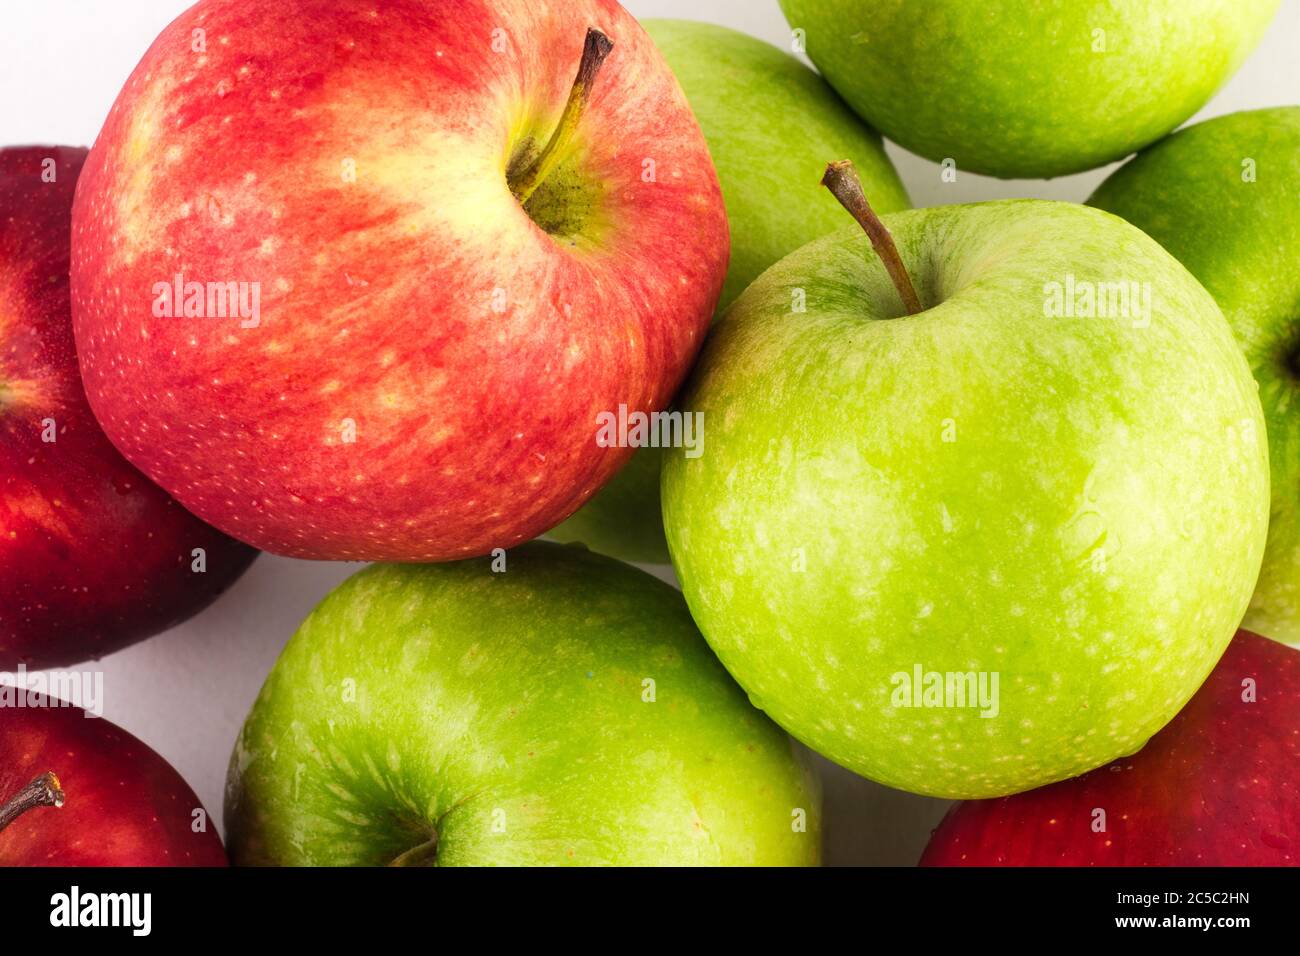 green apple and red apple close up on white background fruit agriculture food isolated Stock Photo